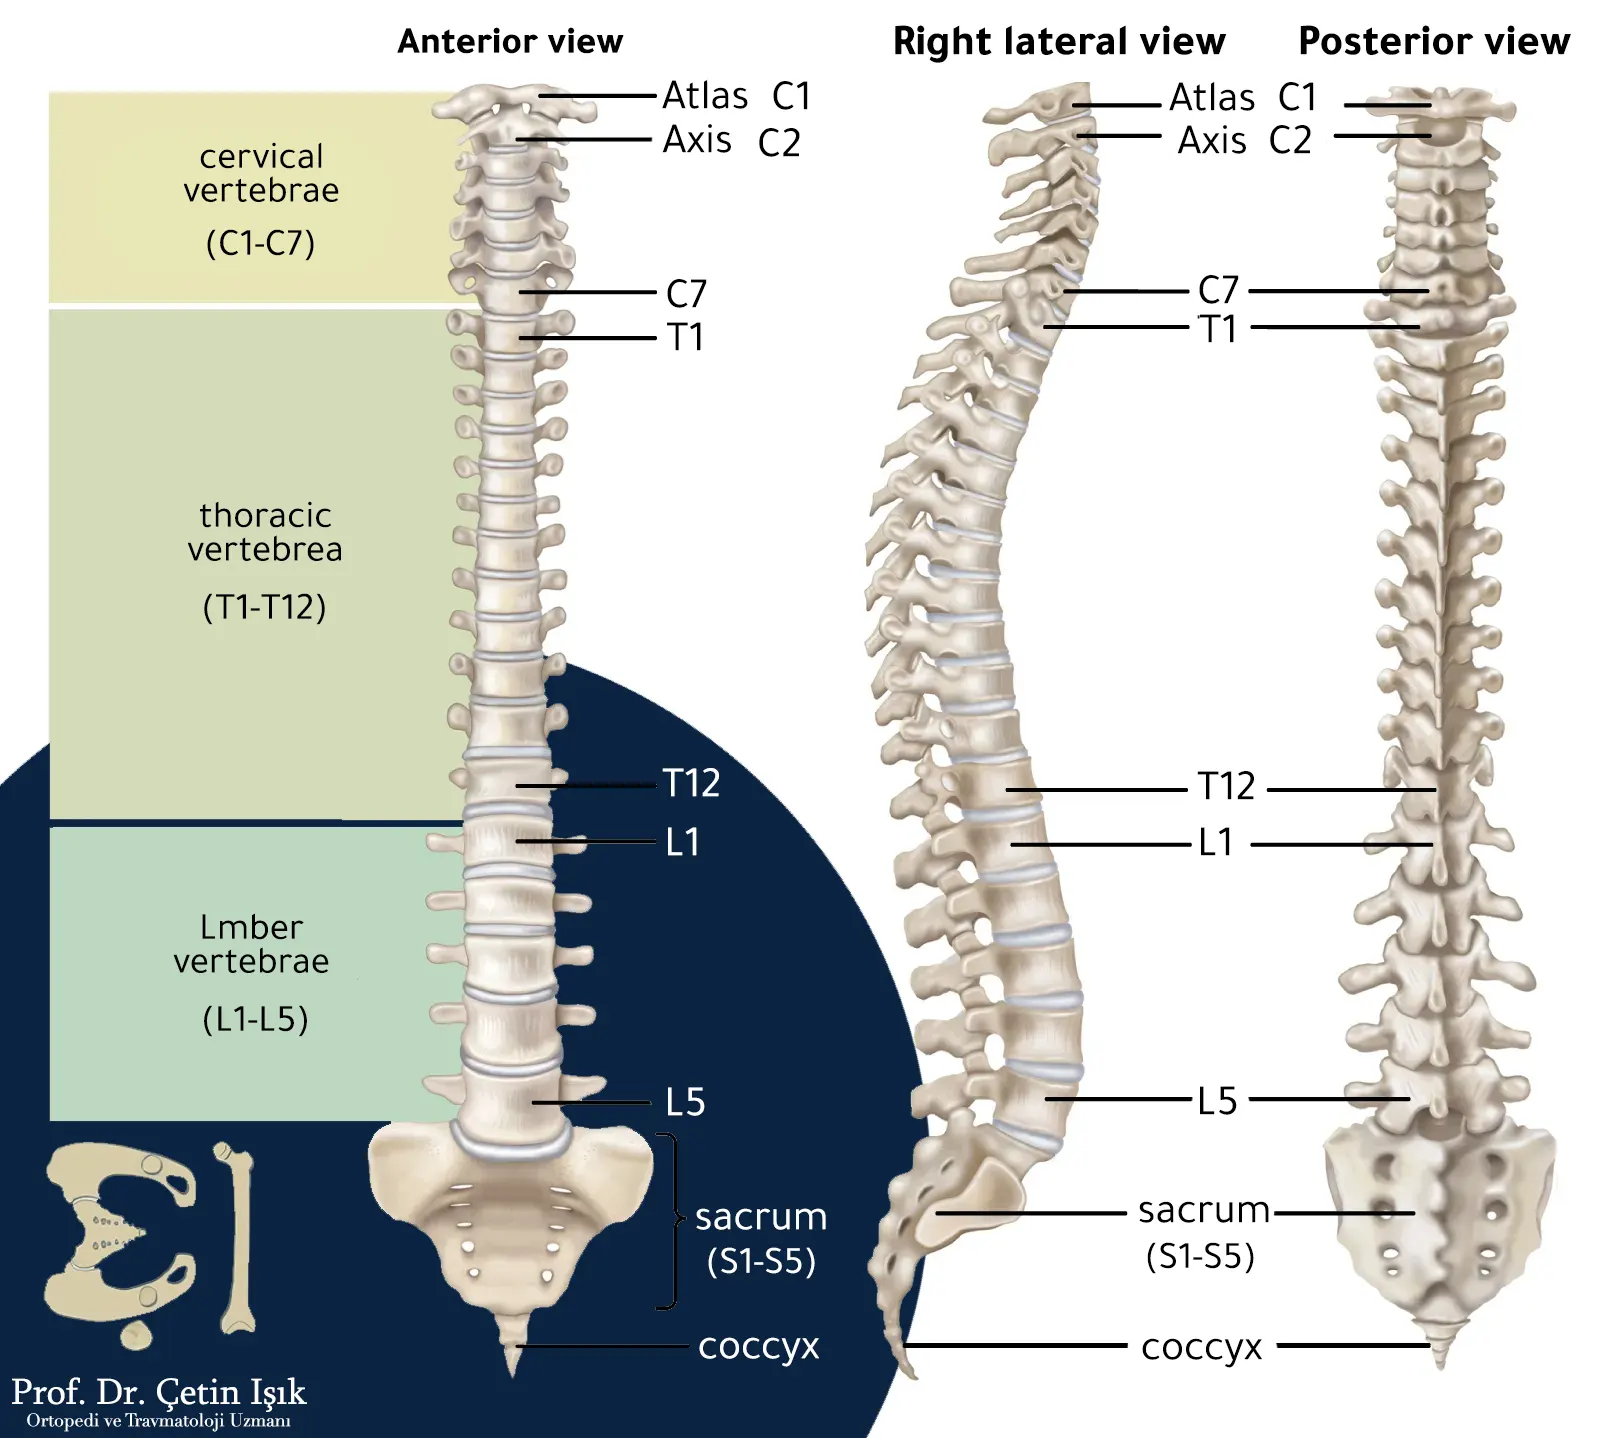 The picture shows the types of vertebrae, their number, and the cartilaginous discs located between the vertebrae